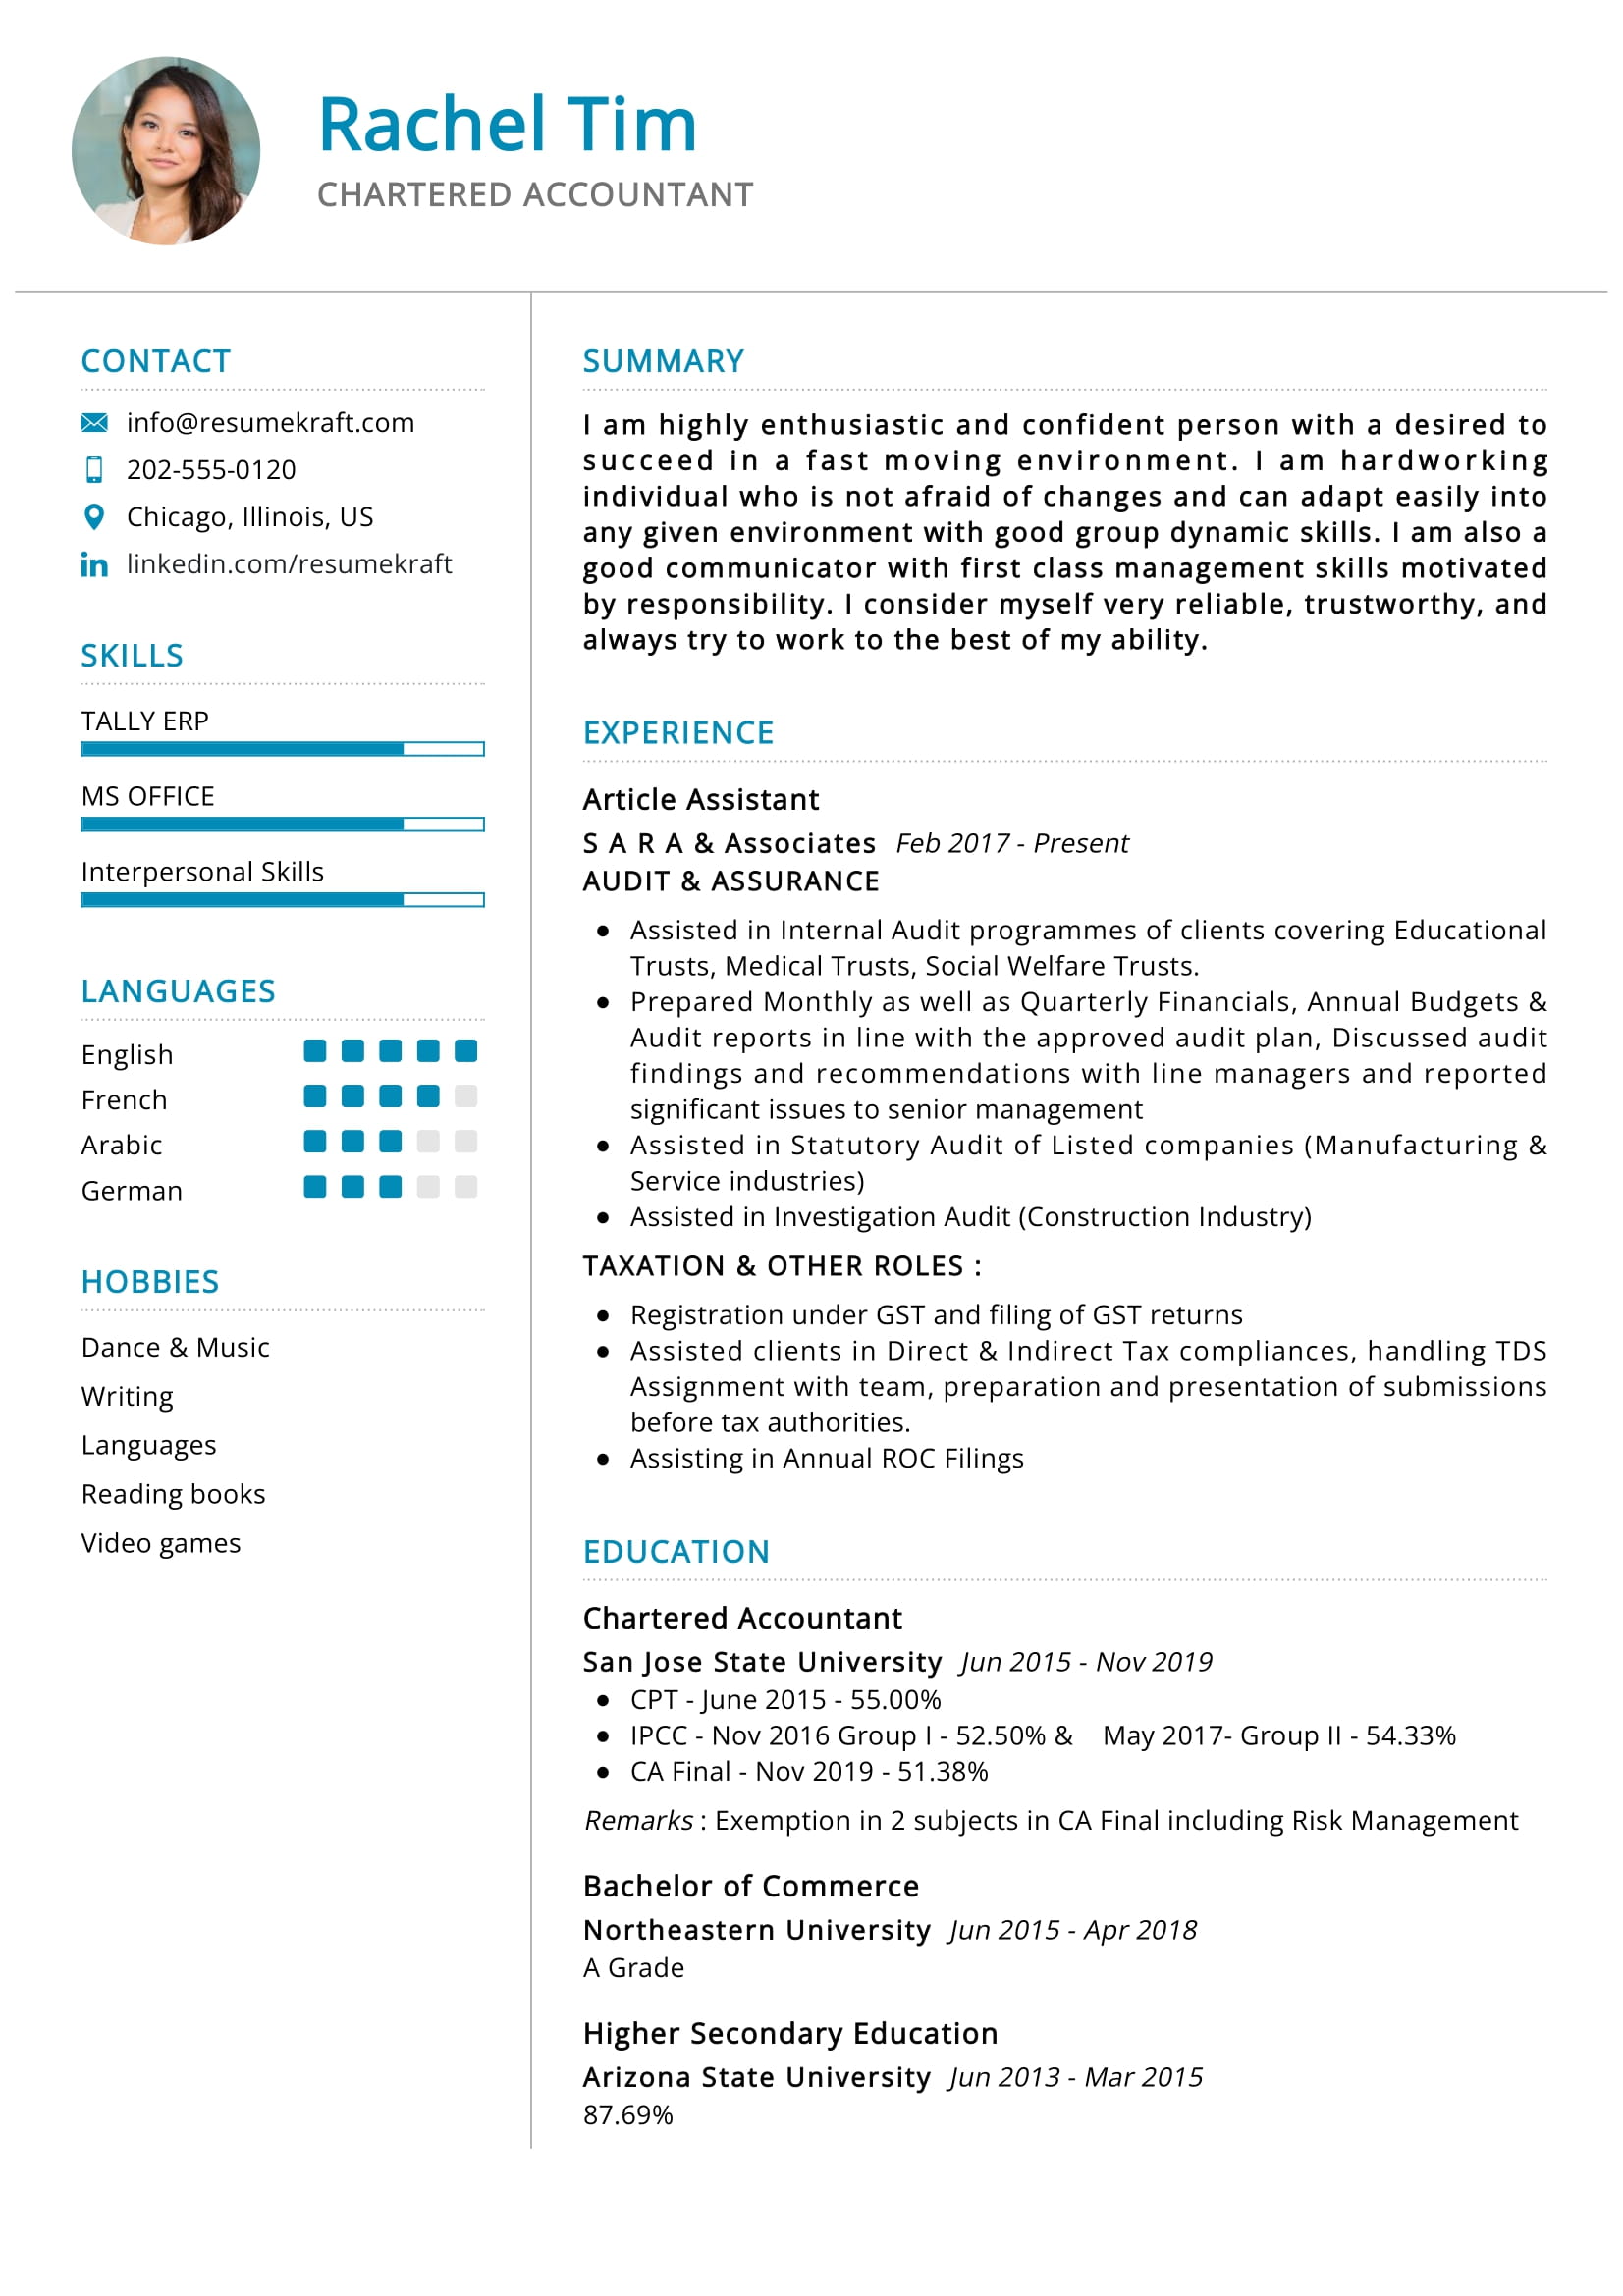 how to write profile summary in resume for accountant